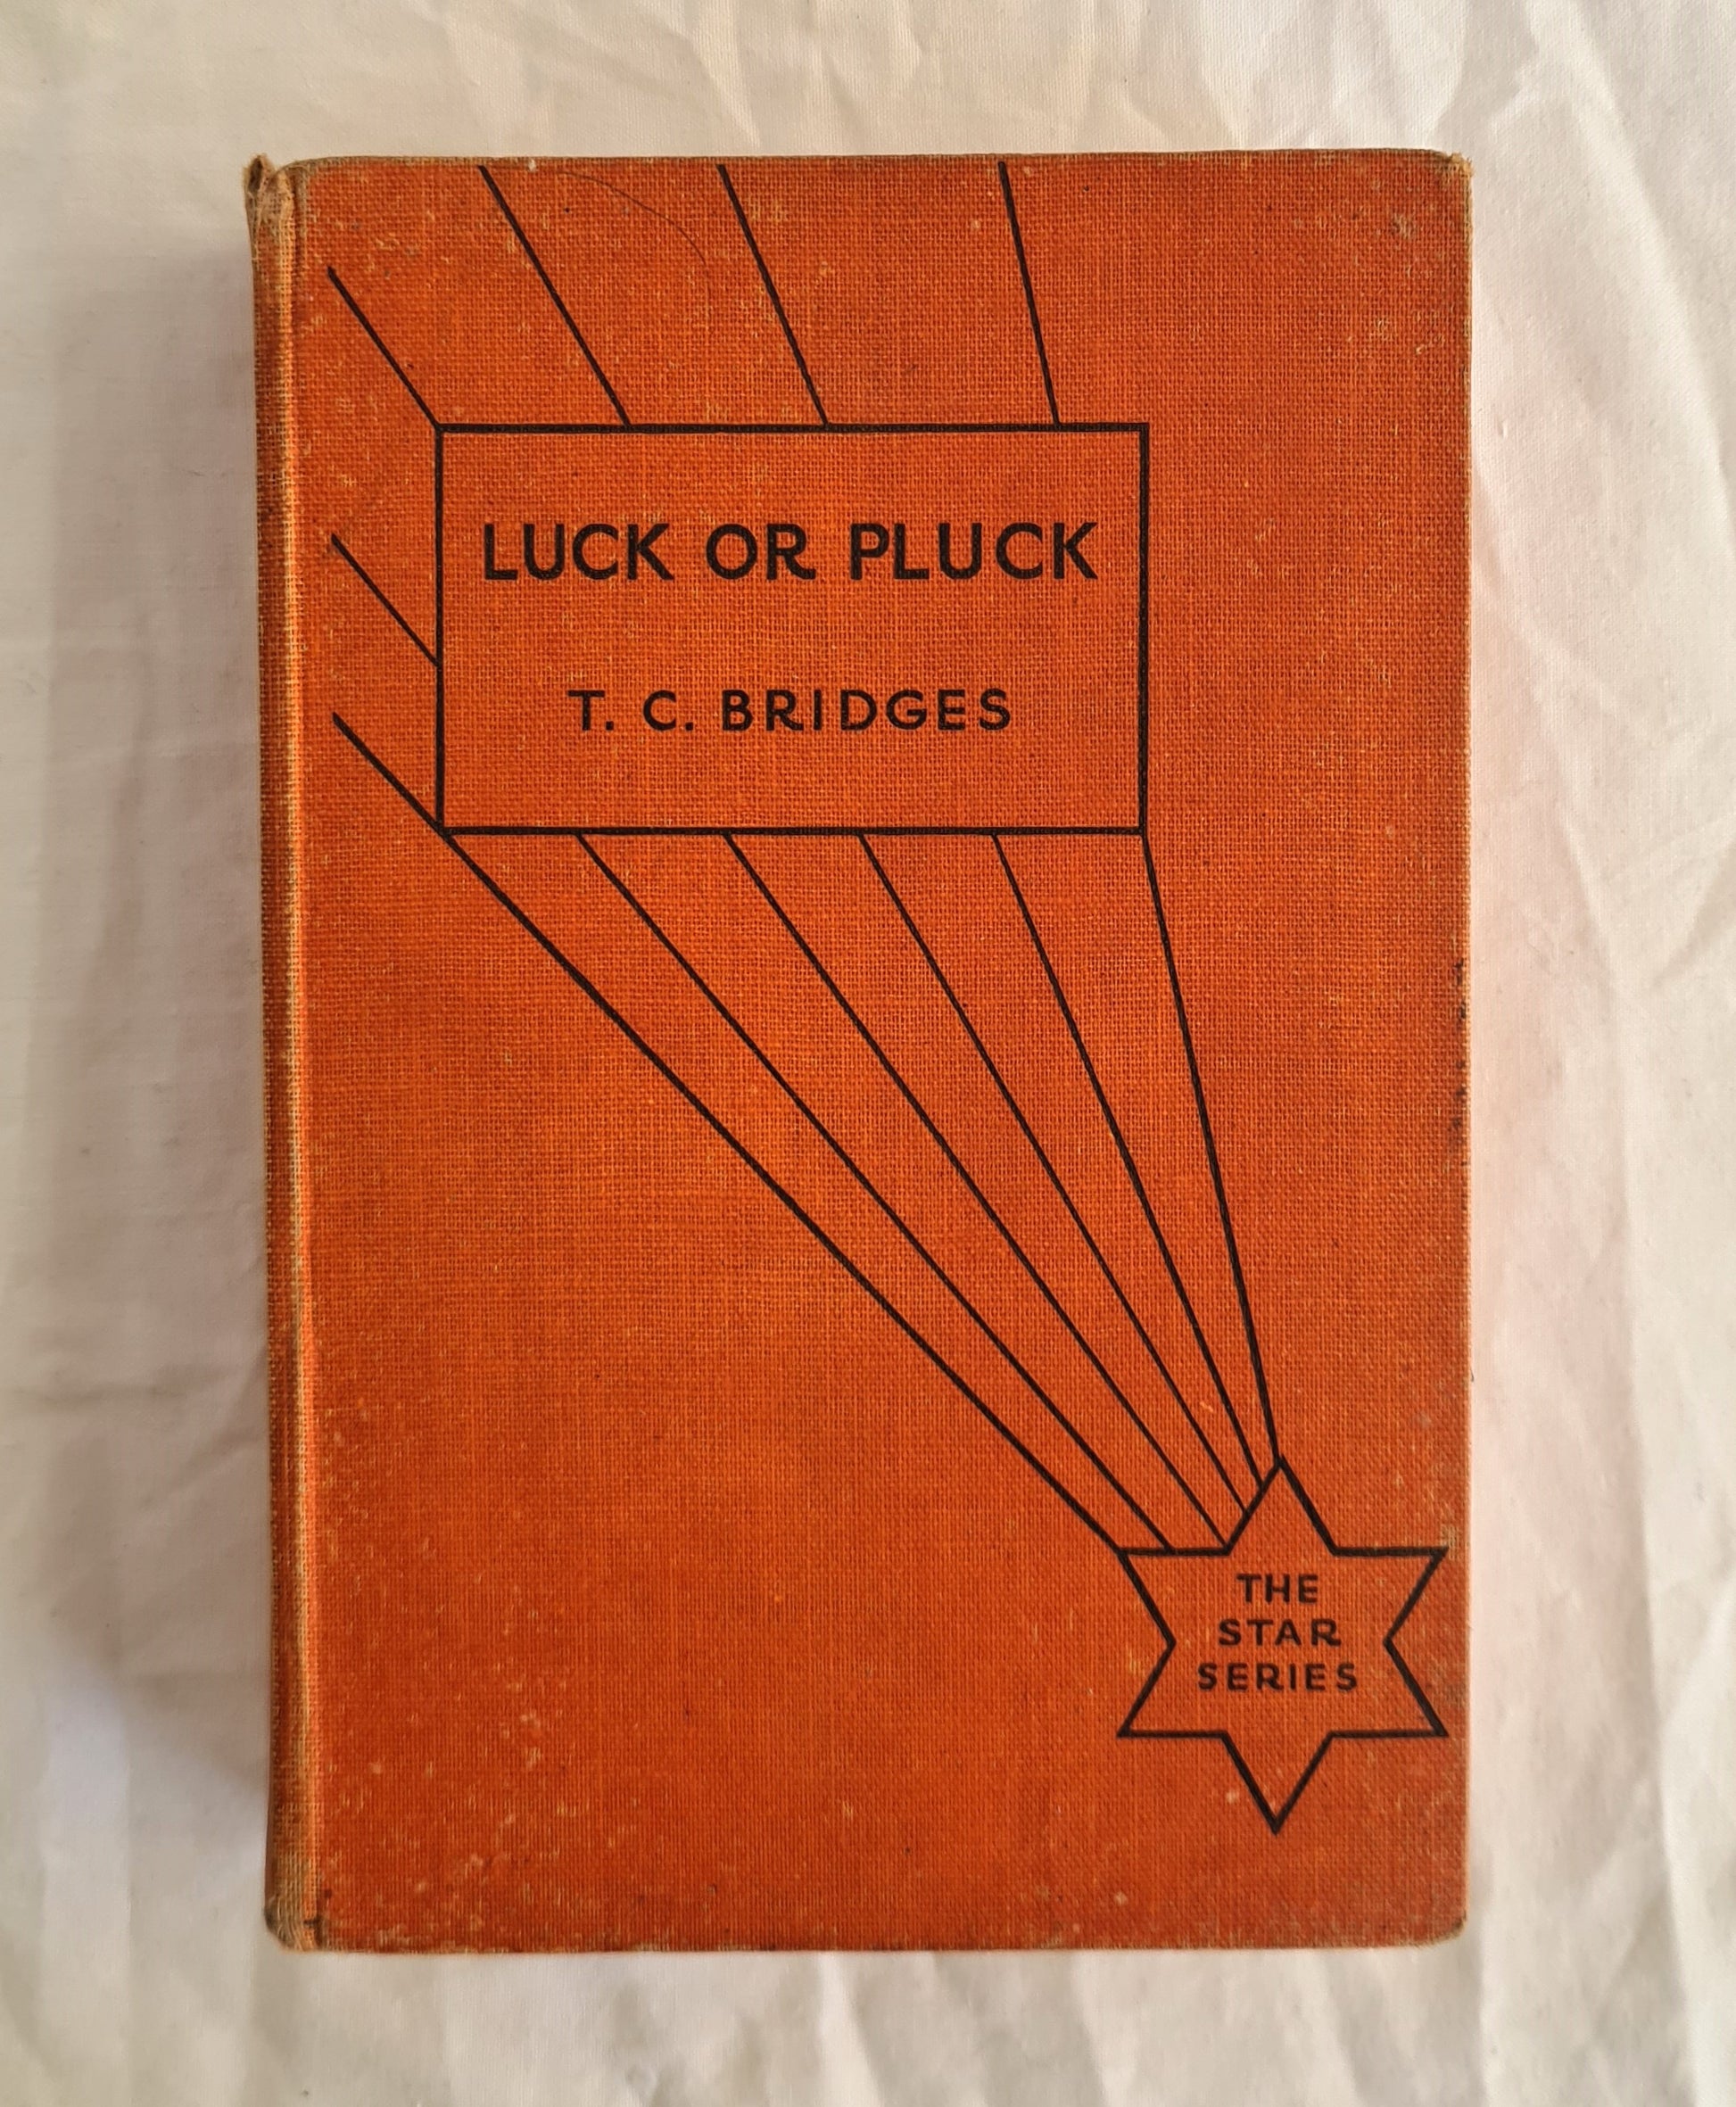 Luck or Pluck  A Story of the Northern Forests  by T. C. Bridges